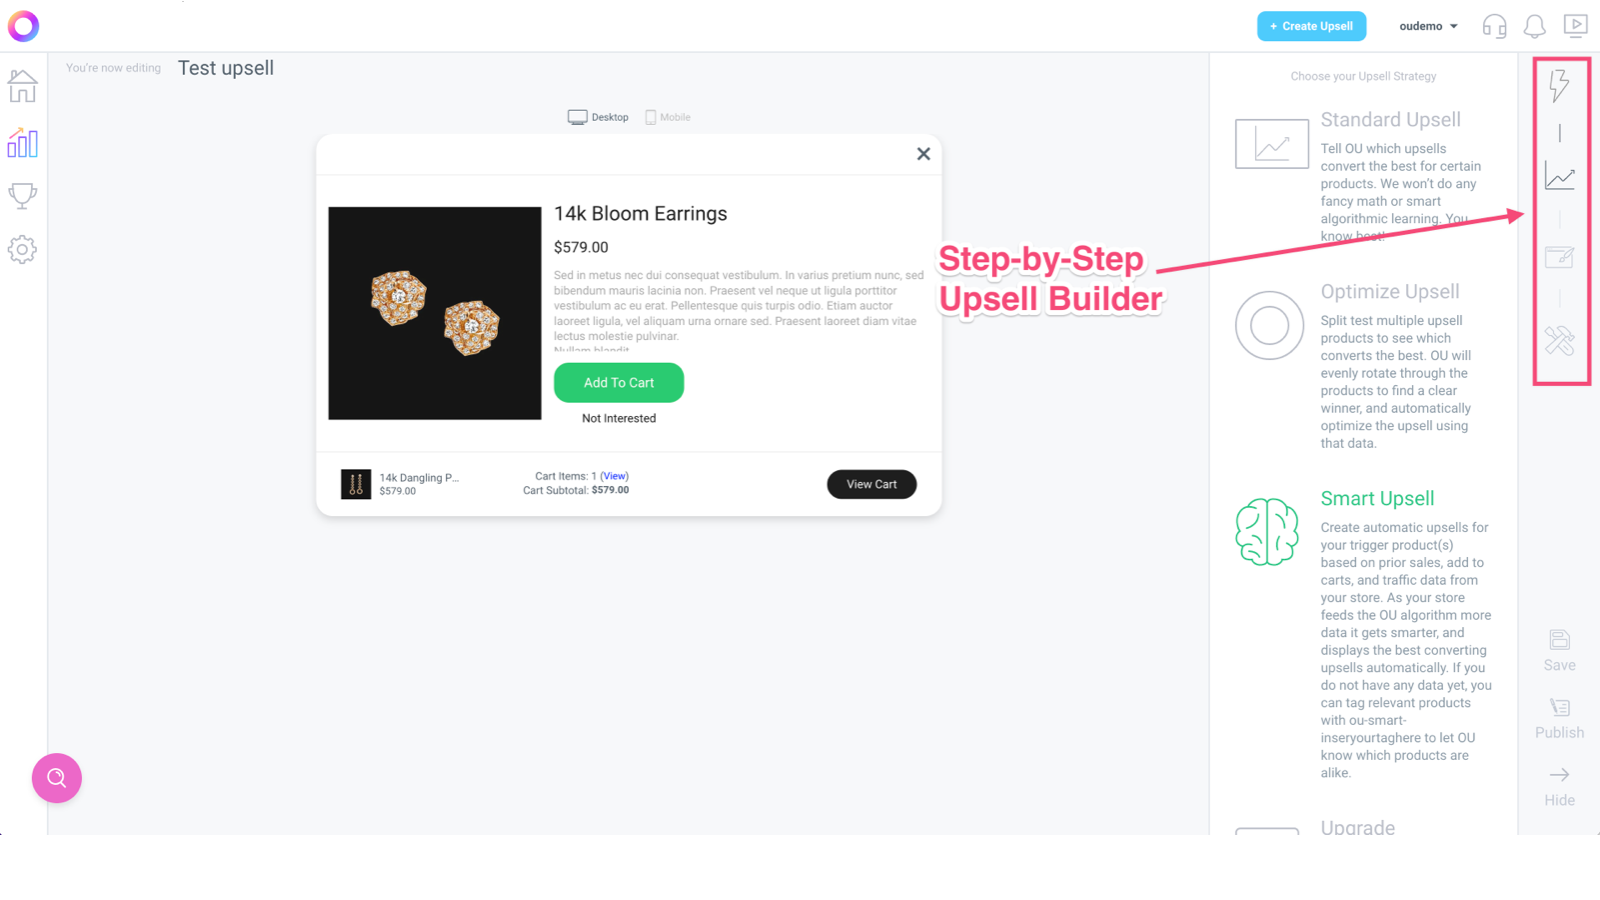 Easy to use upsell builder